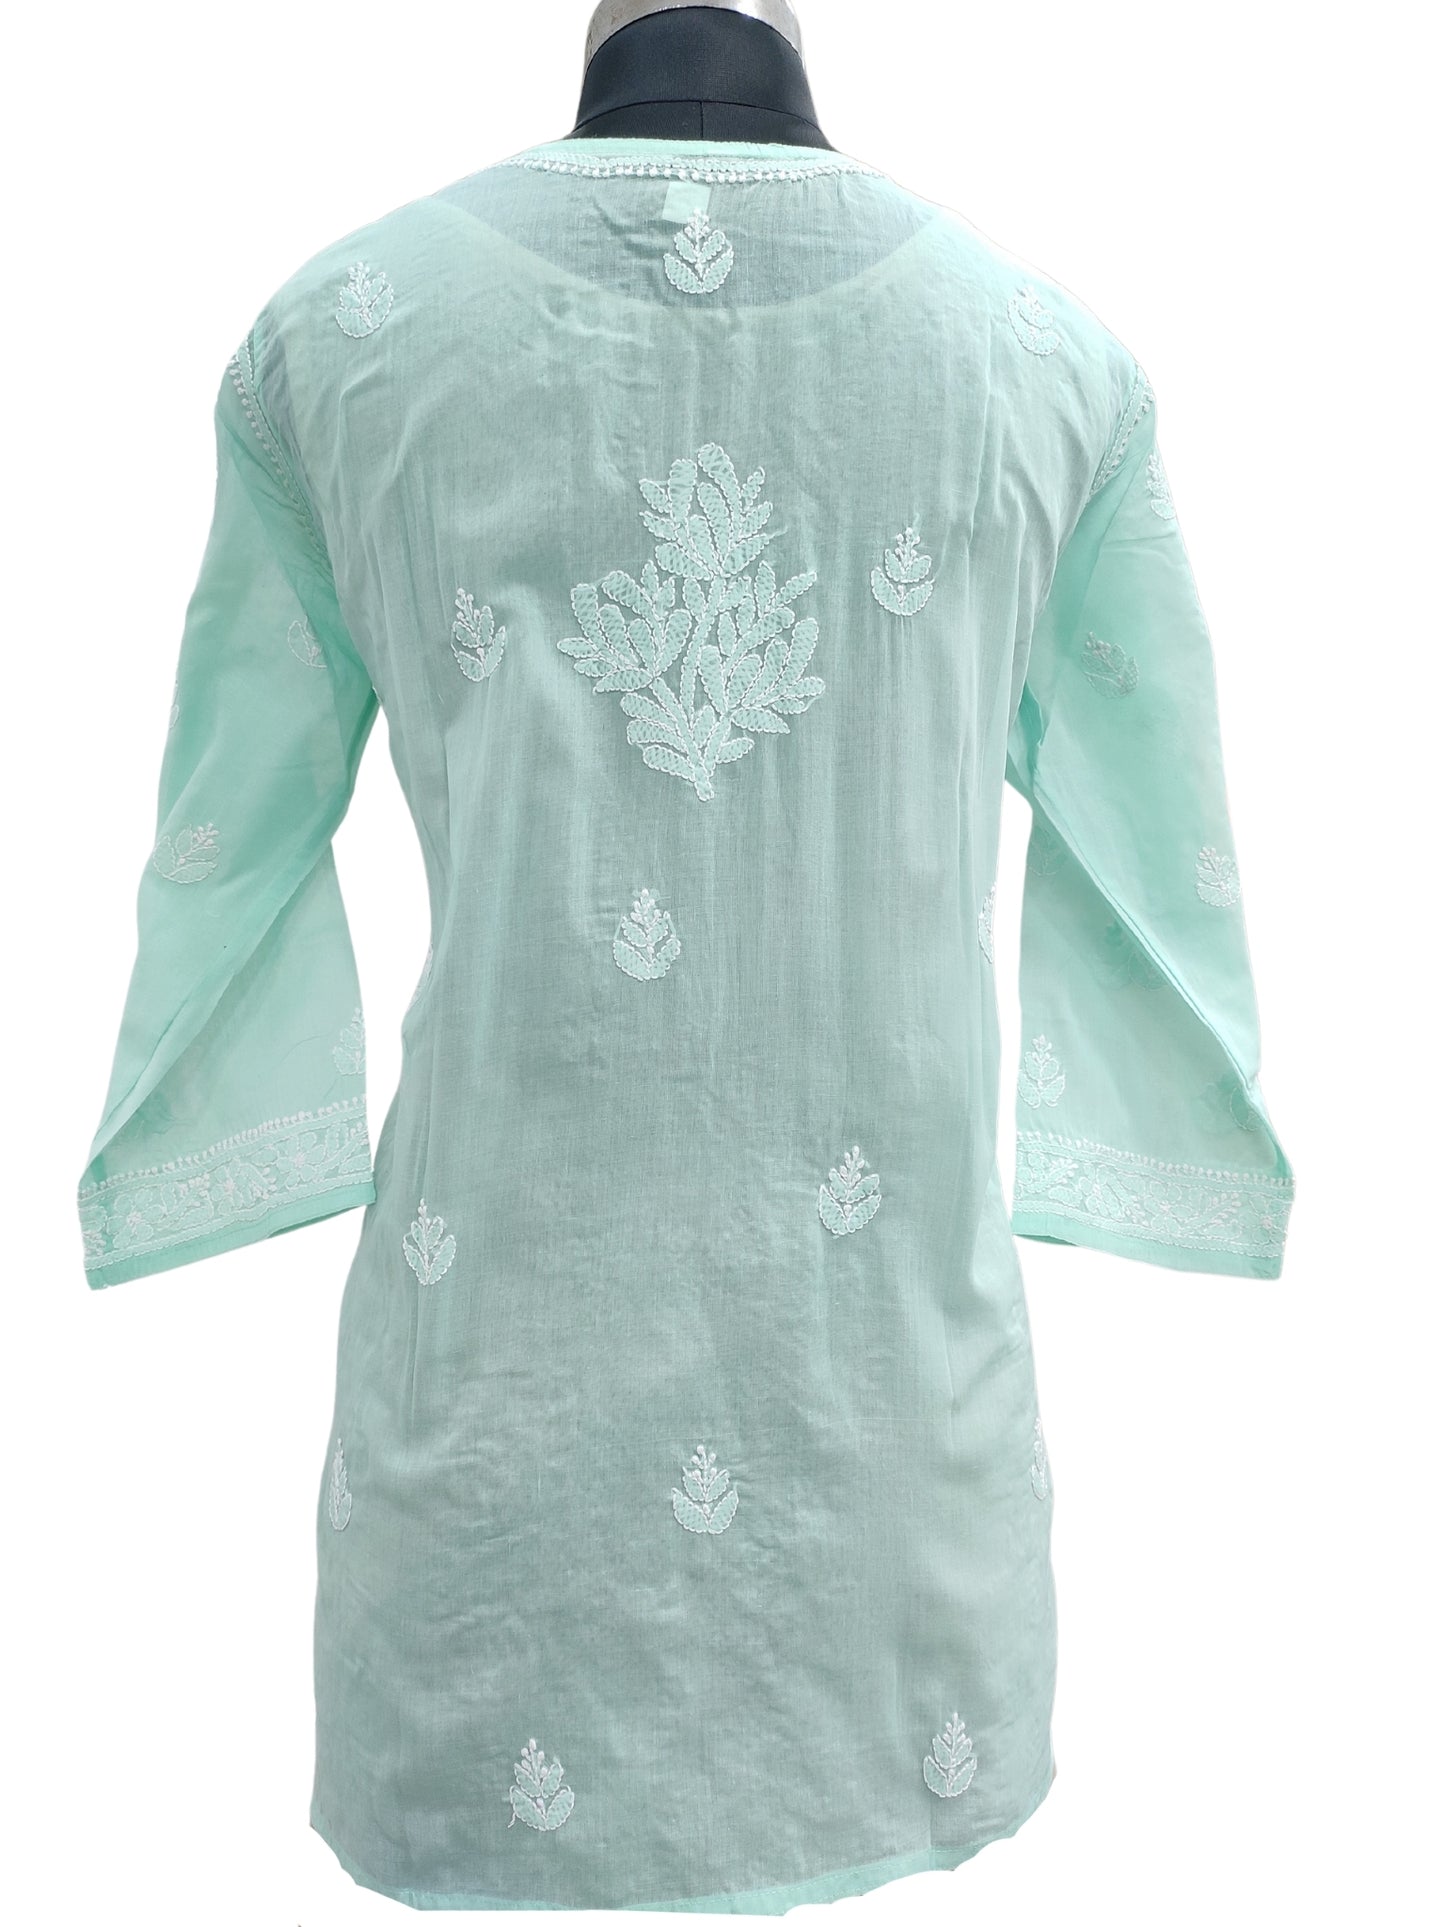 Shyamal Chikan Hand Embroidered Sea Green Cotton Lucknowi Chikankari Short Top With Jaali Work- S21762